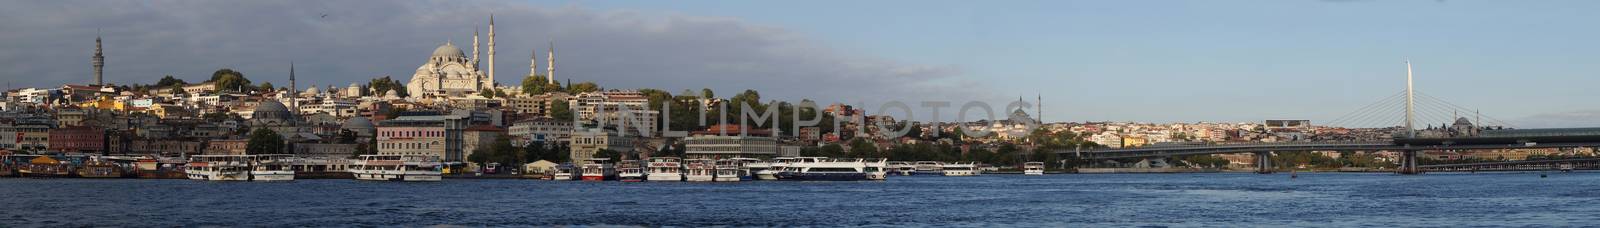 Istanbul - August 30, 2014.  Panorama of Istanbul, the largest city of Turquey, from the Bosforus waterway. On August 2014 in Istanbul, Turkey.